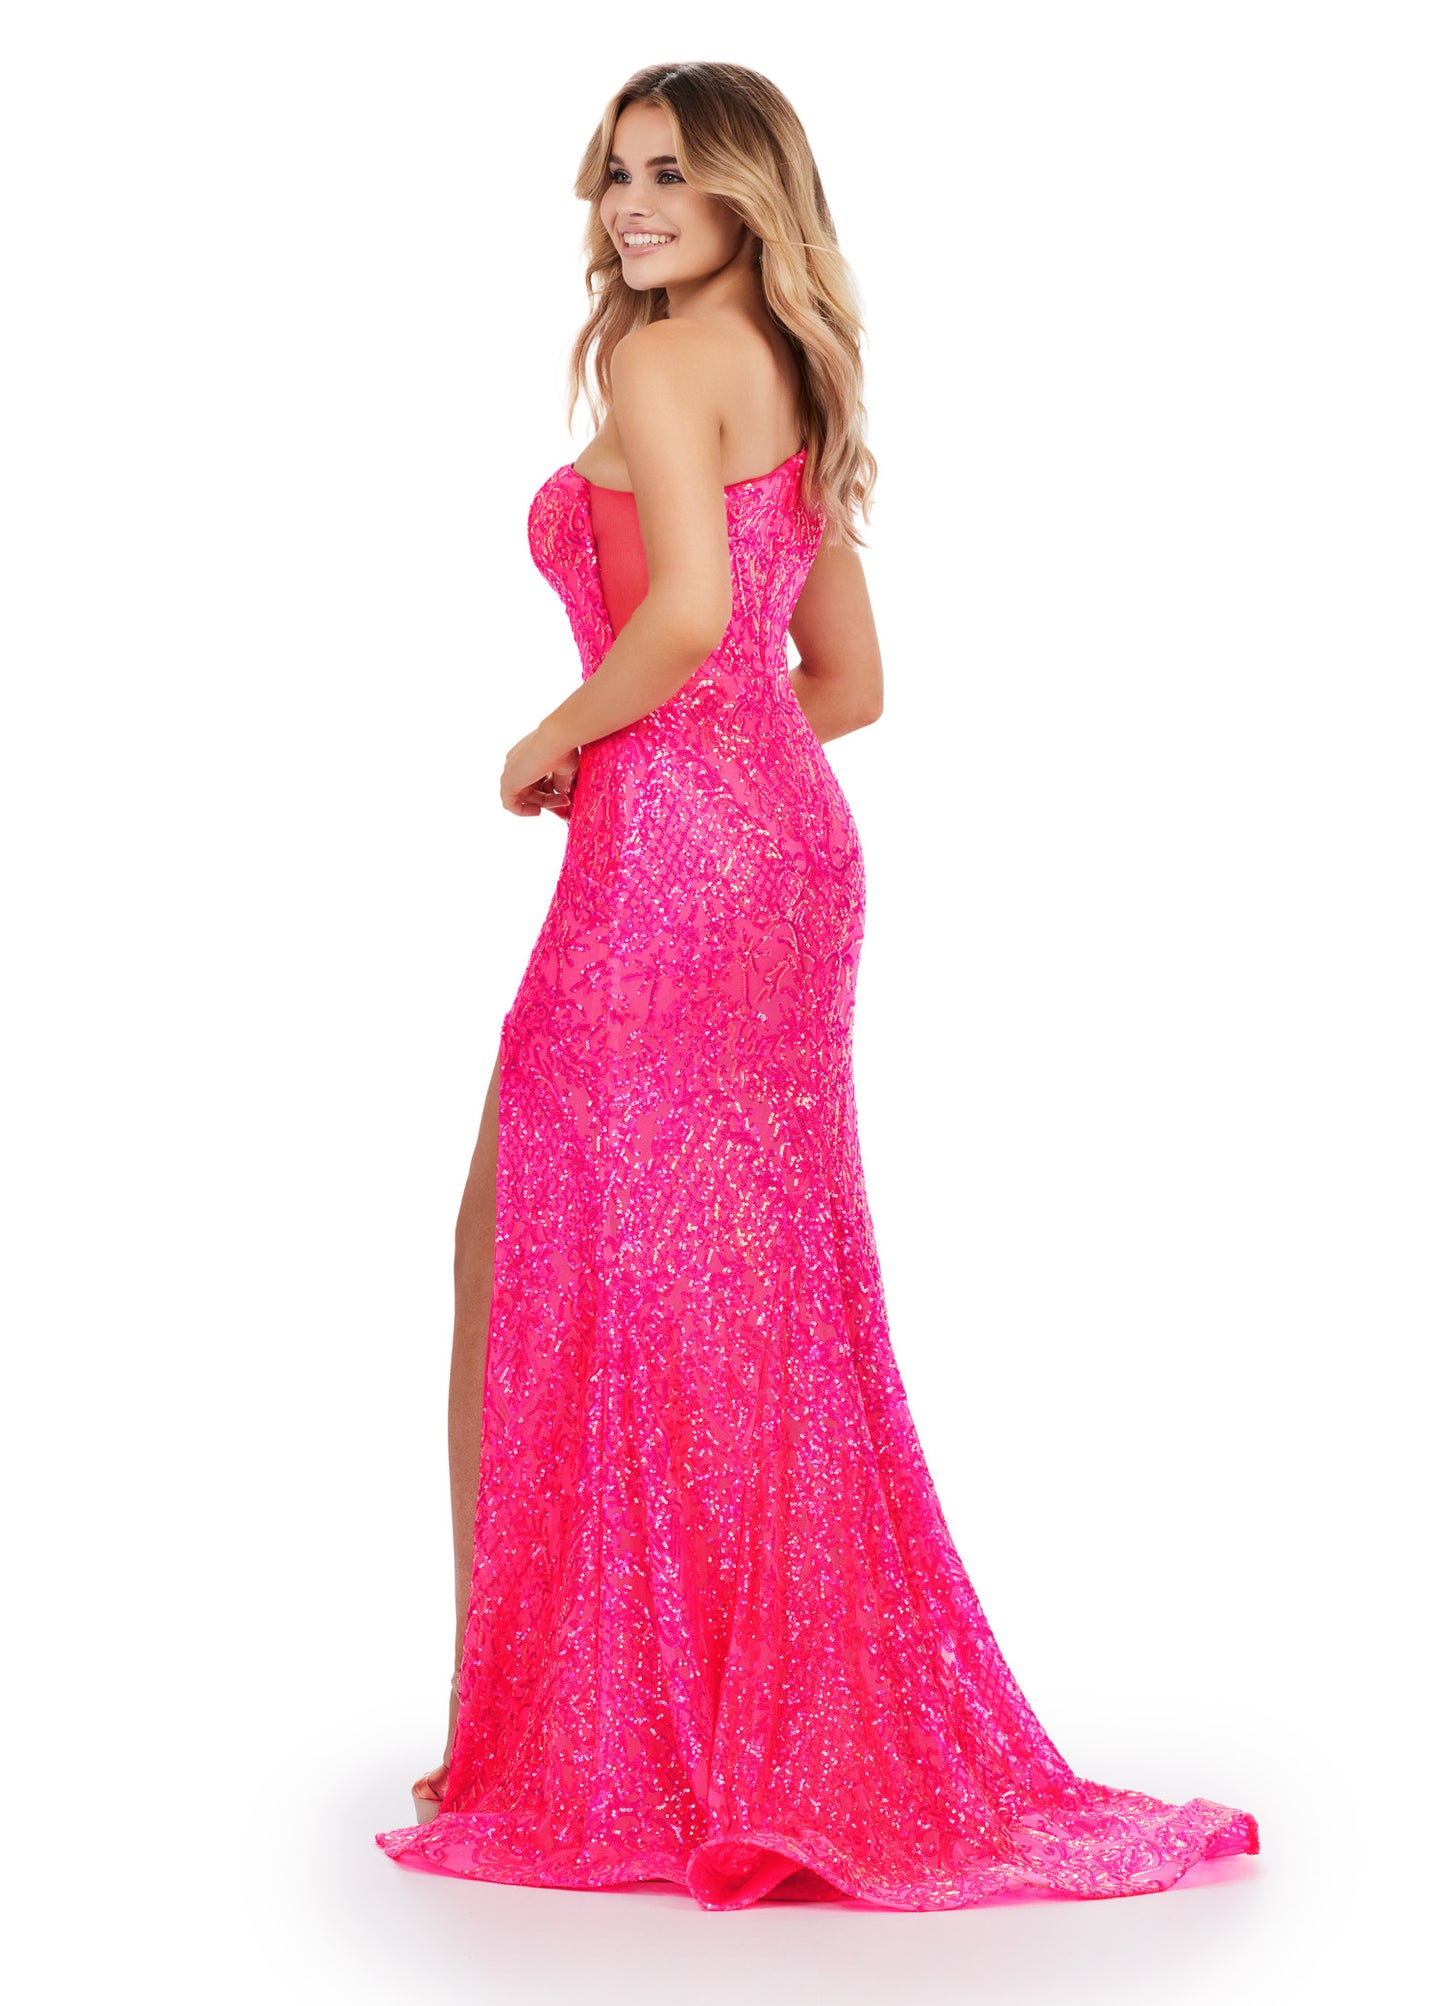 The Ashley Lauren 11471 Long Prom Dress is expertly crafted with a fitted one shoulder design and stretch sequin material, creating a stunning formal pageant gown. Stand out with its sleek silhouette and comfortable fit, perfect for your next special occasion. This memorable one shoulder stretch sequin gown features an illusion cut out side and left leg slit.